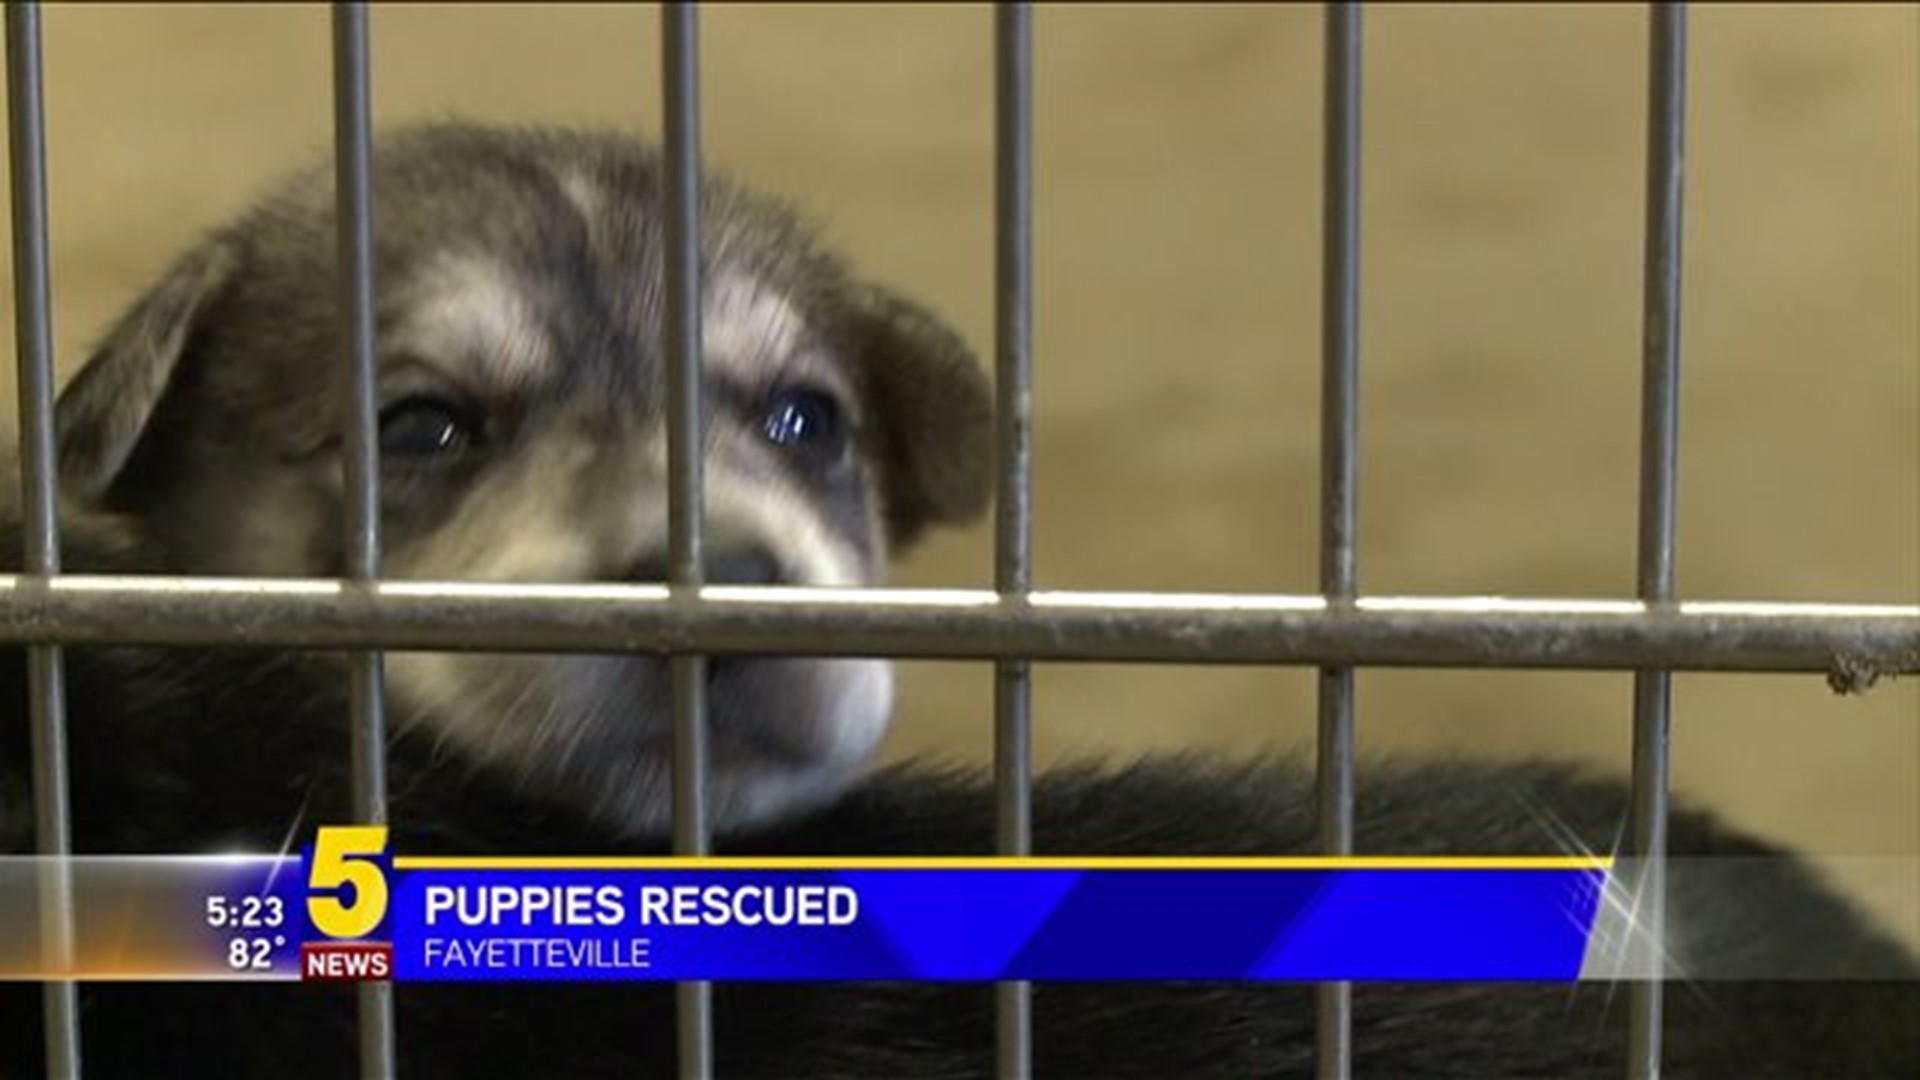 Puppies Saved in Fayetteville